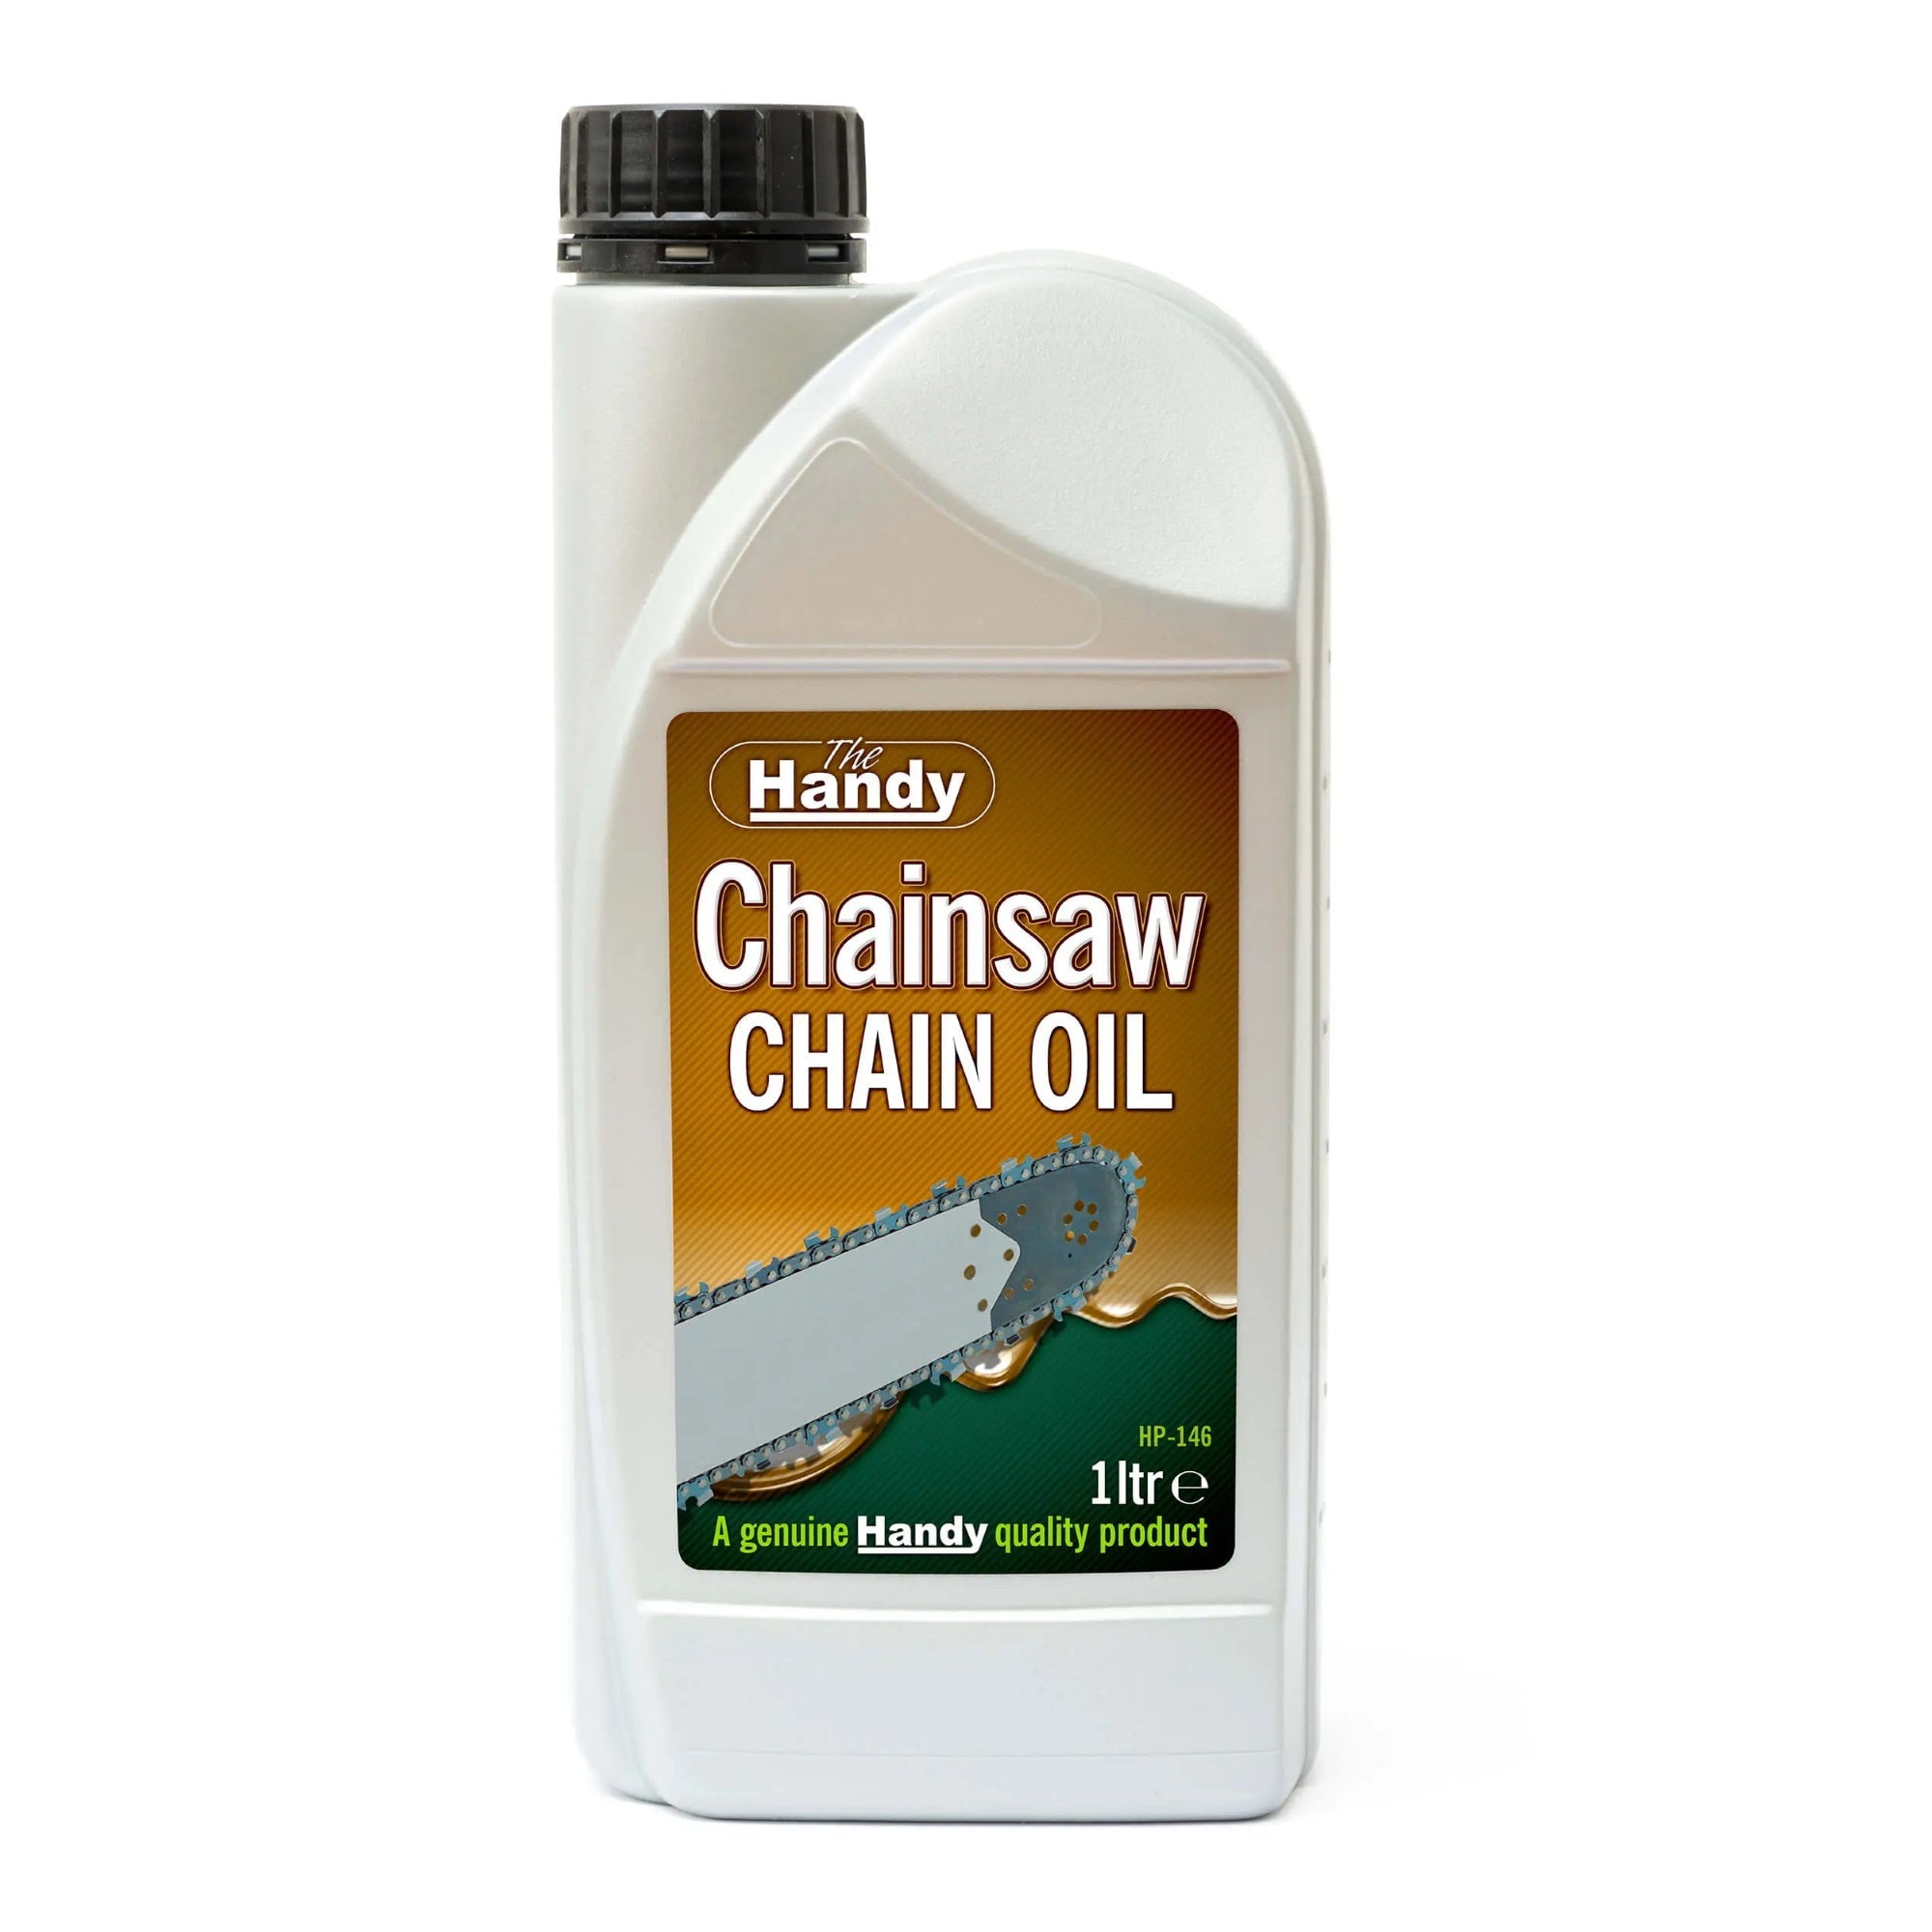 The Handy HP-146 Chainsaw Chain Oil 1Ltr - Premium Chainsaws from Handy Distribution - Just $7.99! Shop now at W Hurst & Son (IW) Ltd